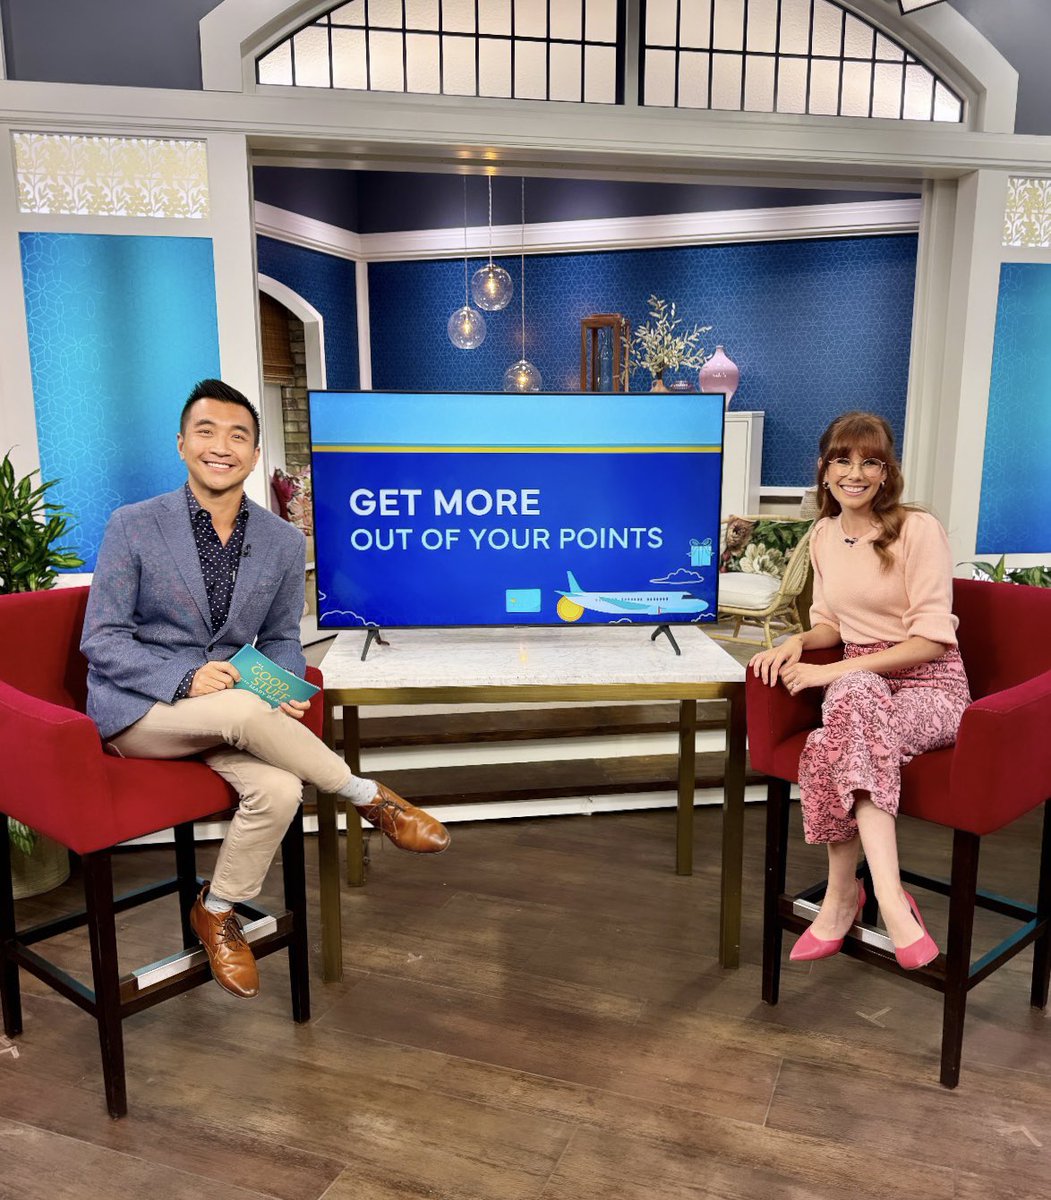 Tomorrow on @TheGoodStuffCTV, it’s all about saving money! 💸 You spend the money anyway… From credit card points to loyalty miles, how to get MORE out of earning and redeeming on your everyday purchases. I share my top tips in my segment airing on @CTV across Canada Monday. 📺